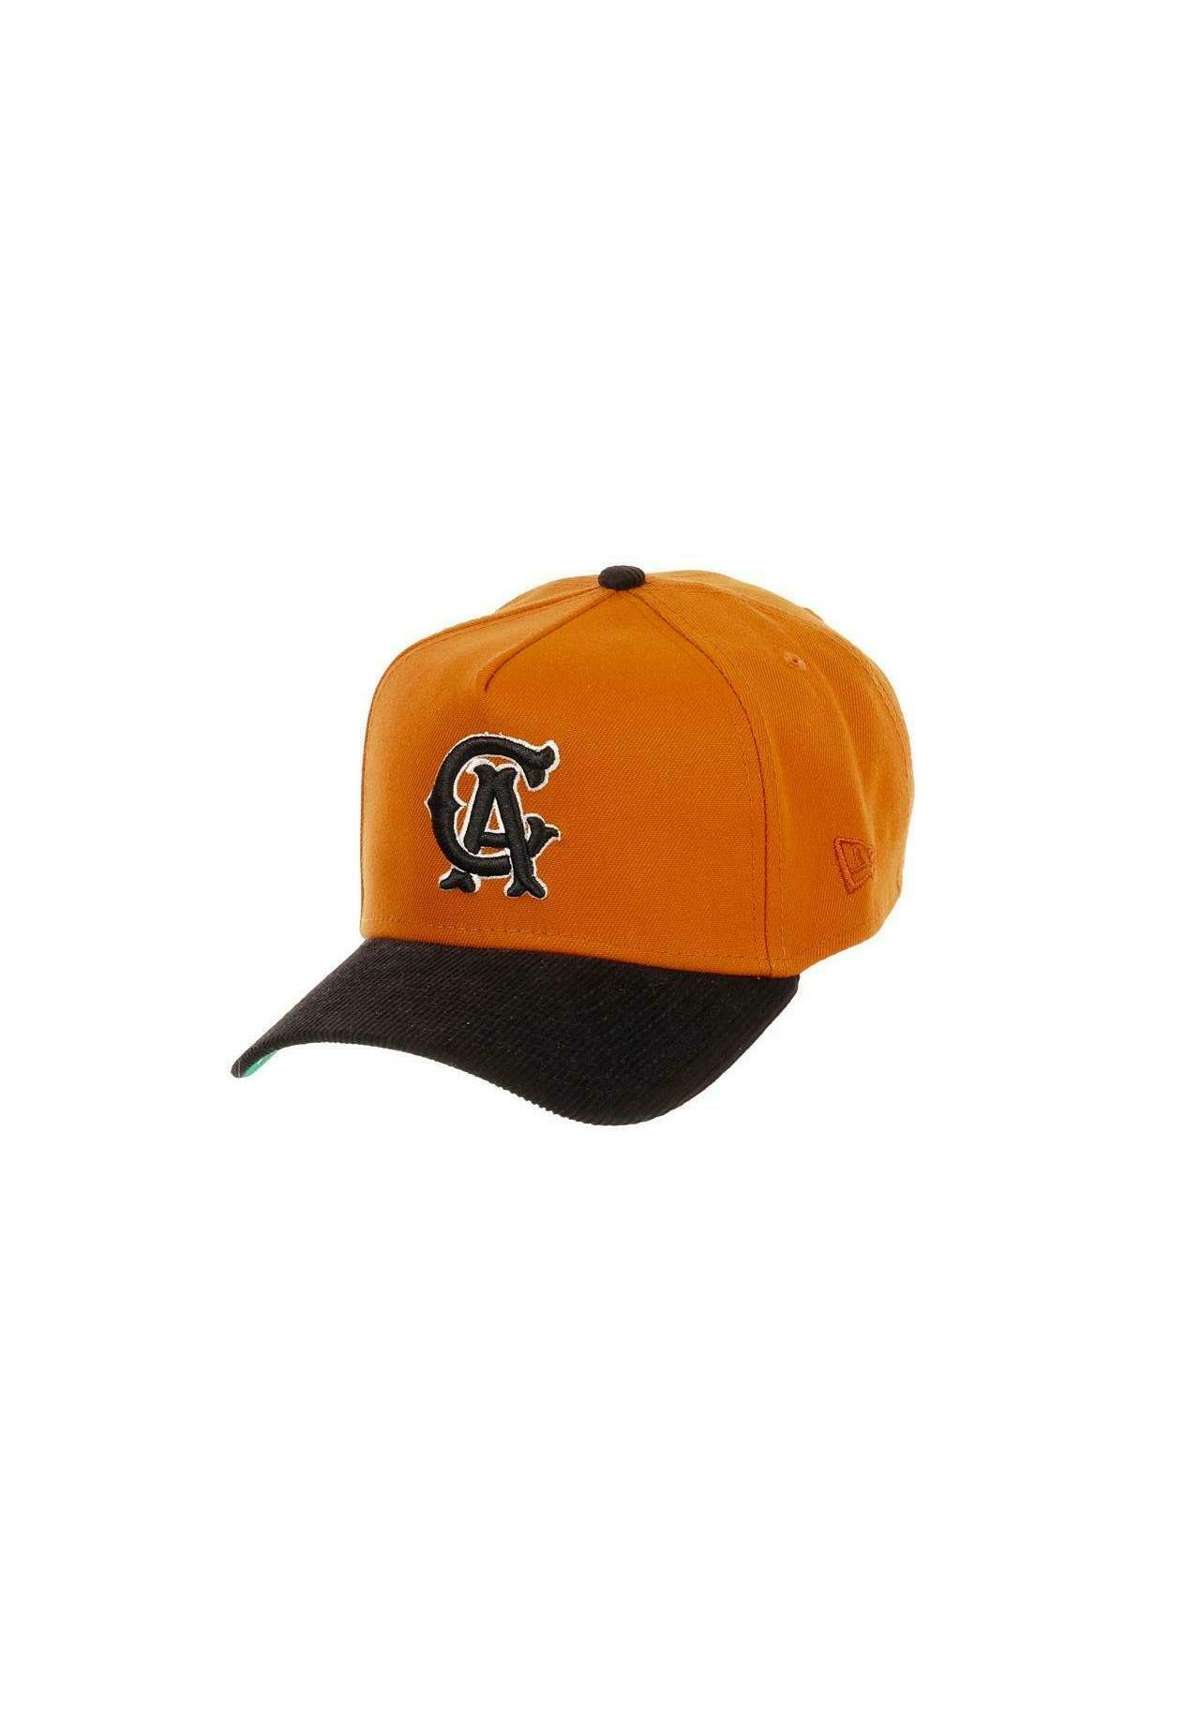 Кепка CALIFORNIA ANGELS MLB ALL-STAR GAME 1967 STADIUM SIDEPATCH CORD 9FORTY A-FRAME SNAPBACK